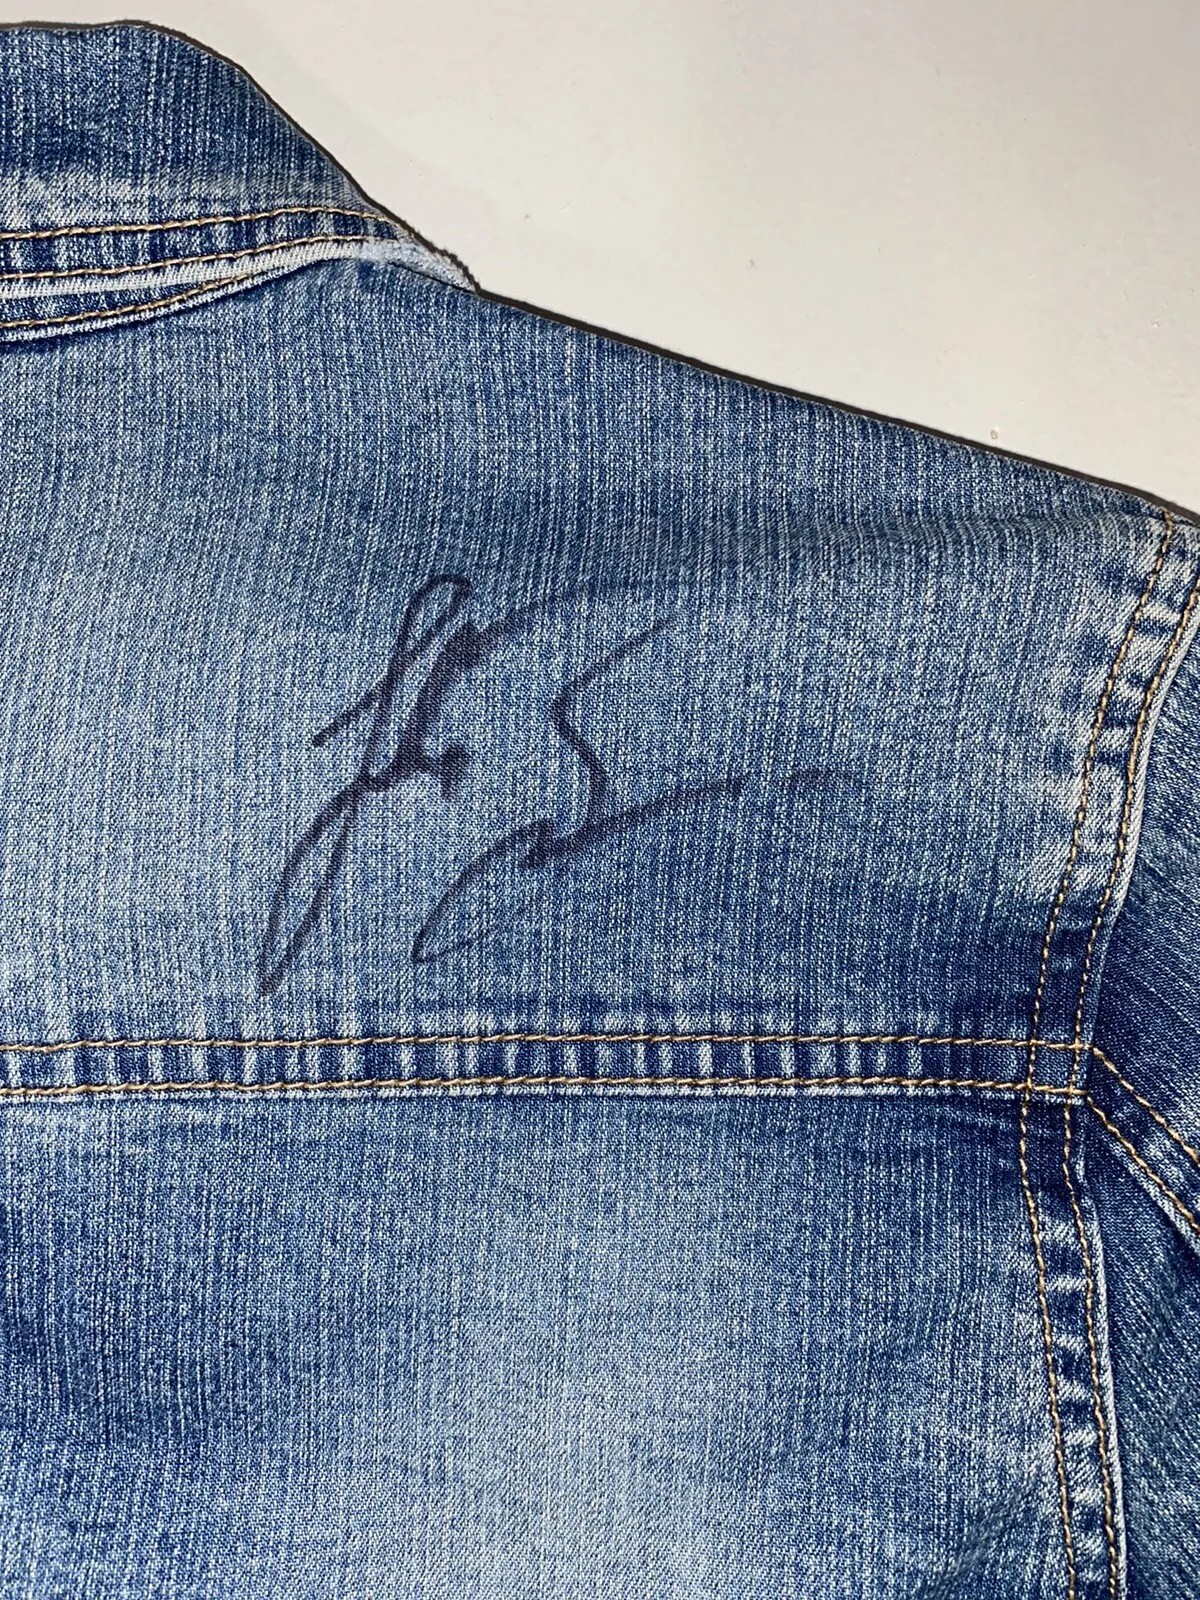 Luke Bryan Autographed Jean Jacket From 10/09/09 Concert @the Dallas Bull Fla